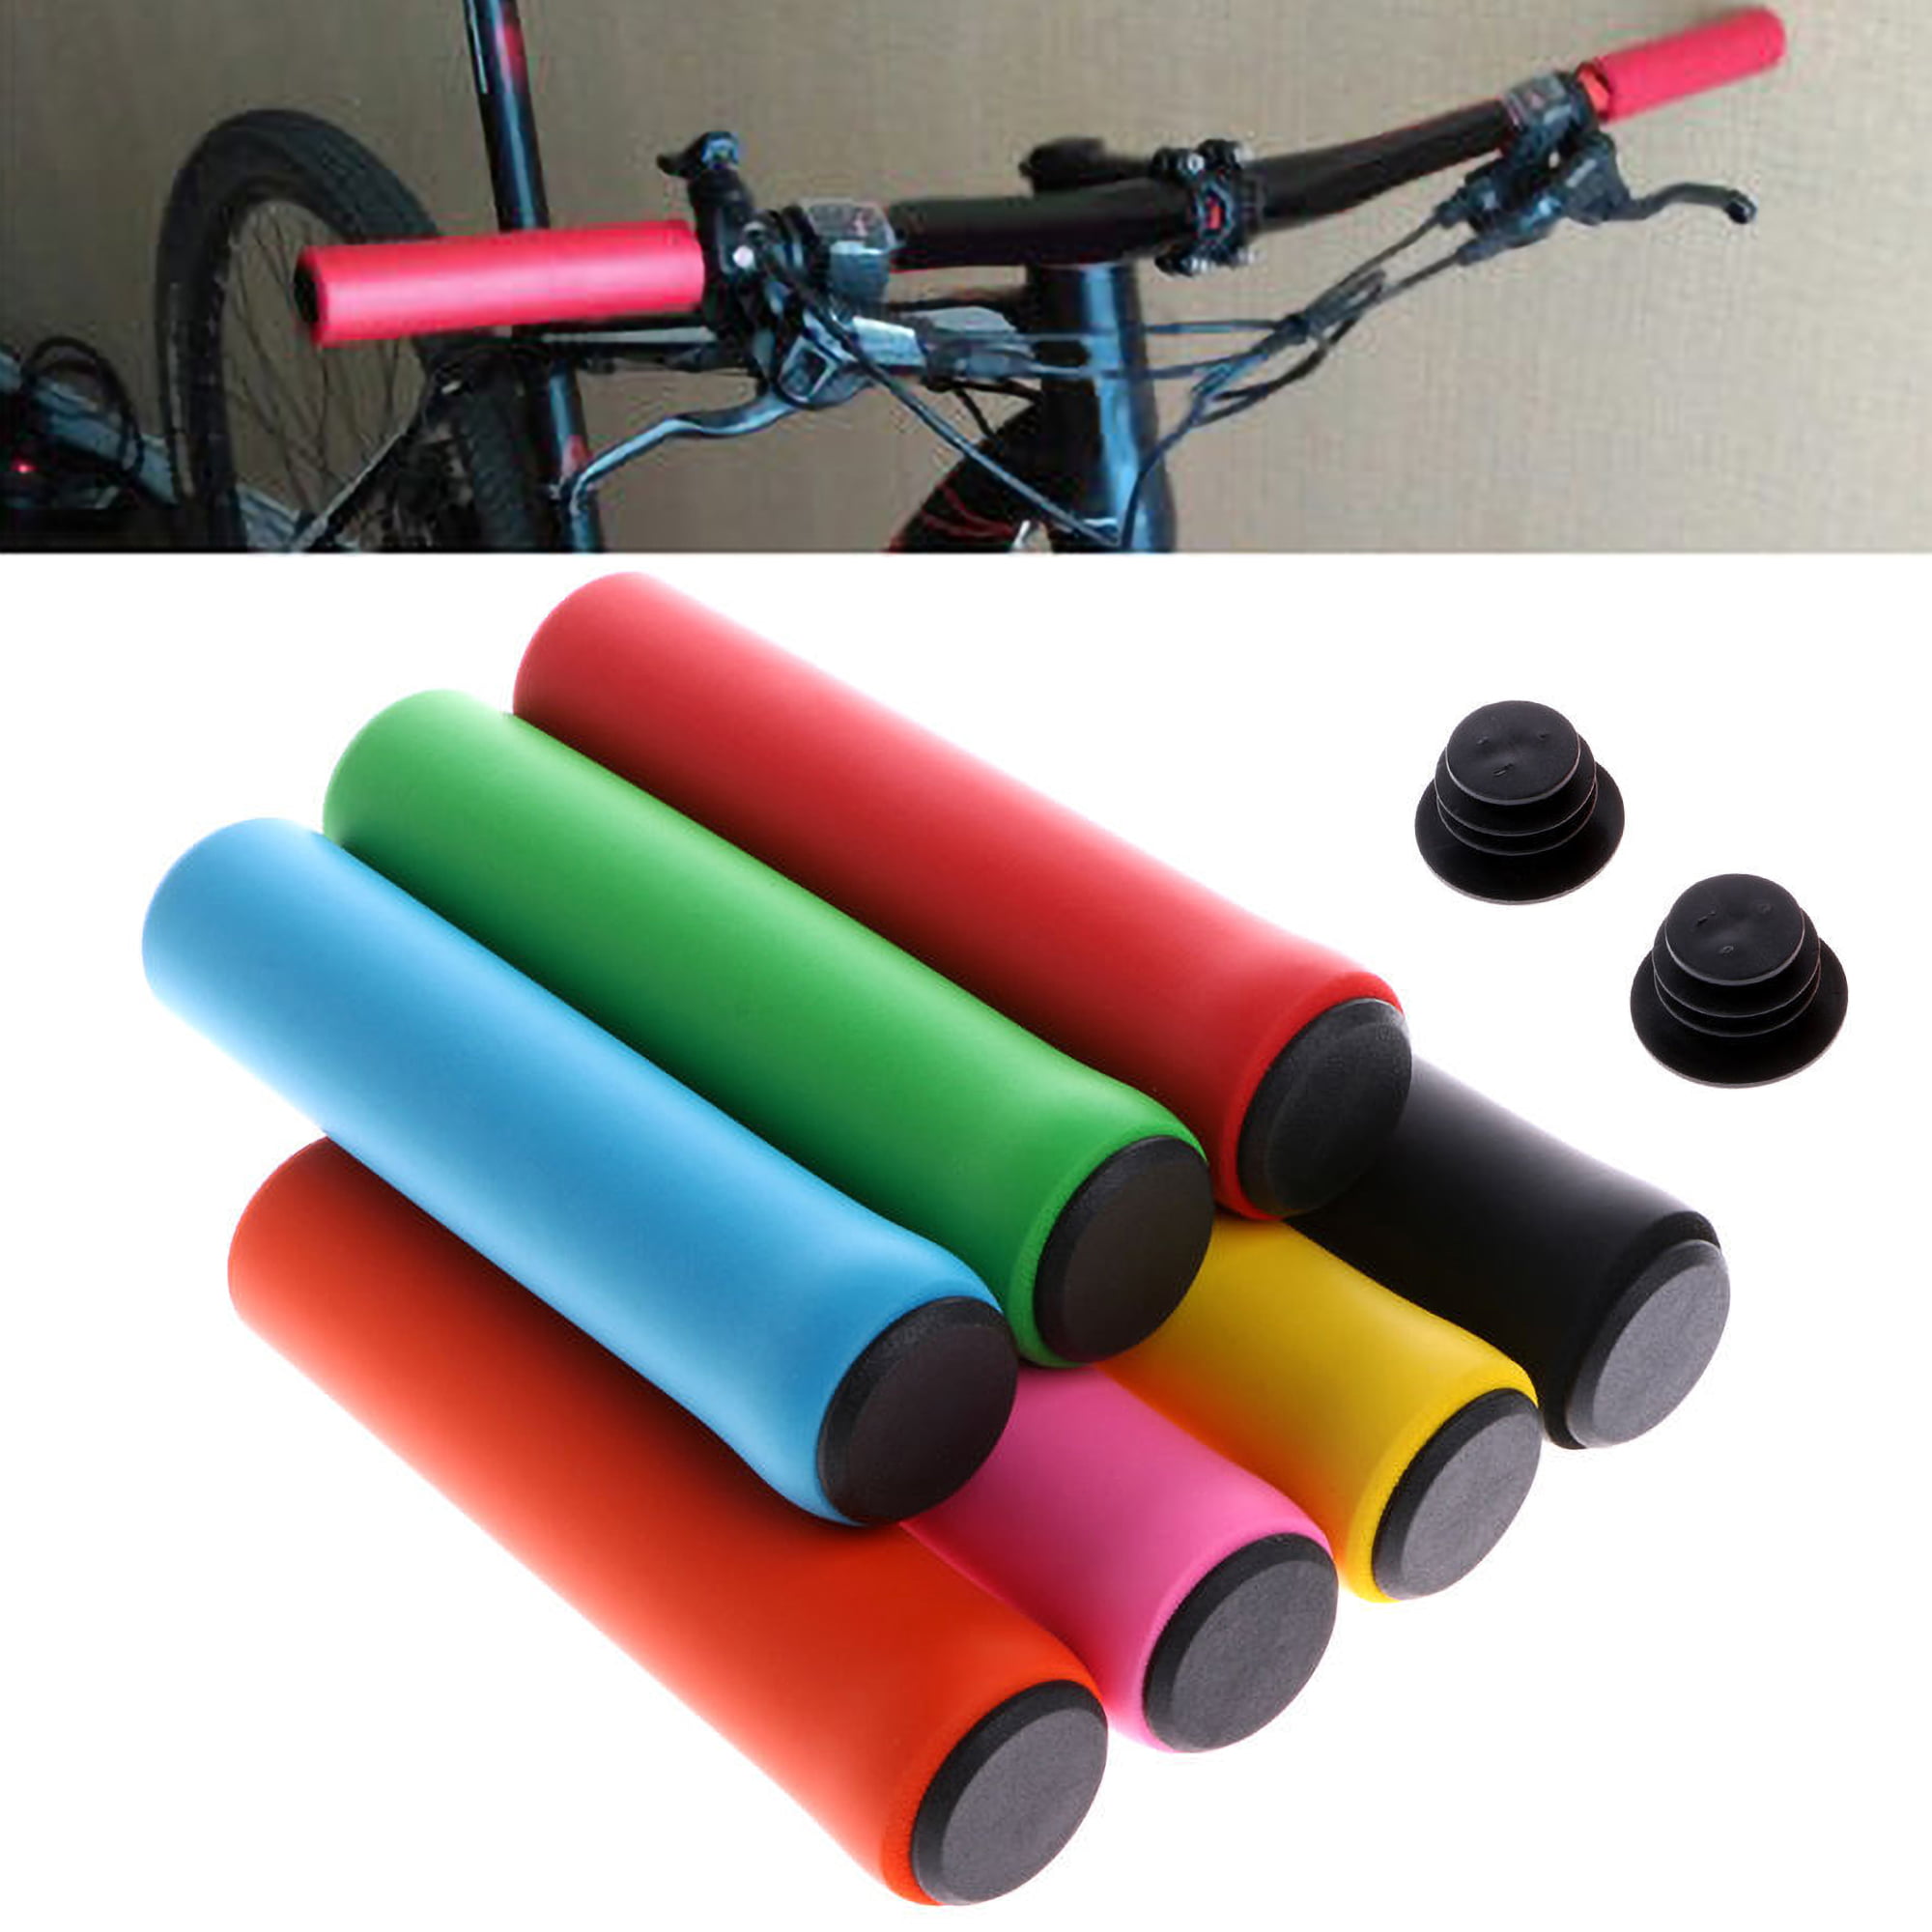 Details about   QUALITY EXTRA COMFORTABLE BIKE FOAM SPONGE HANDLEBAR GRIPS WITH BAR END PLUGS BK 